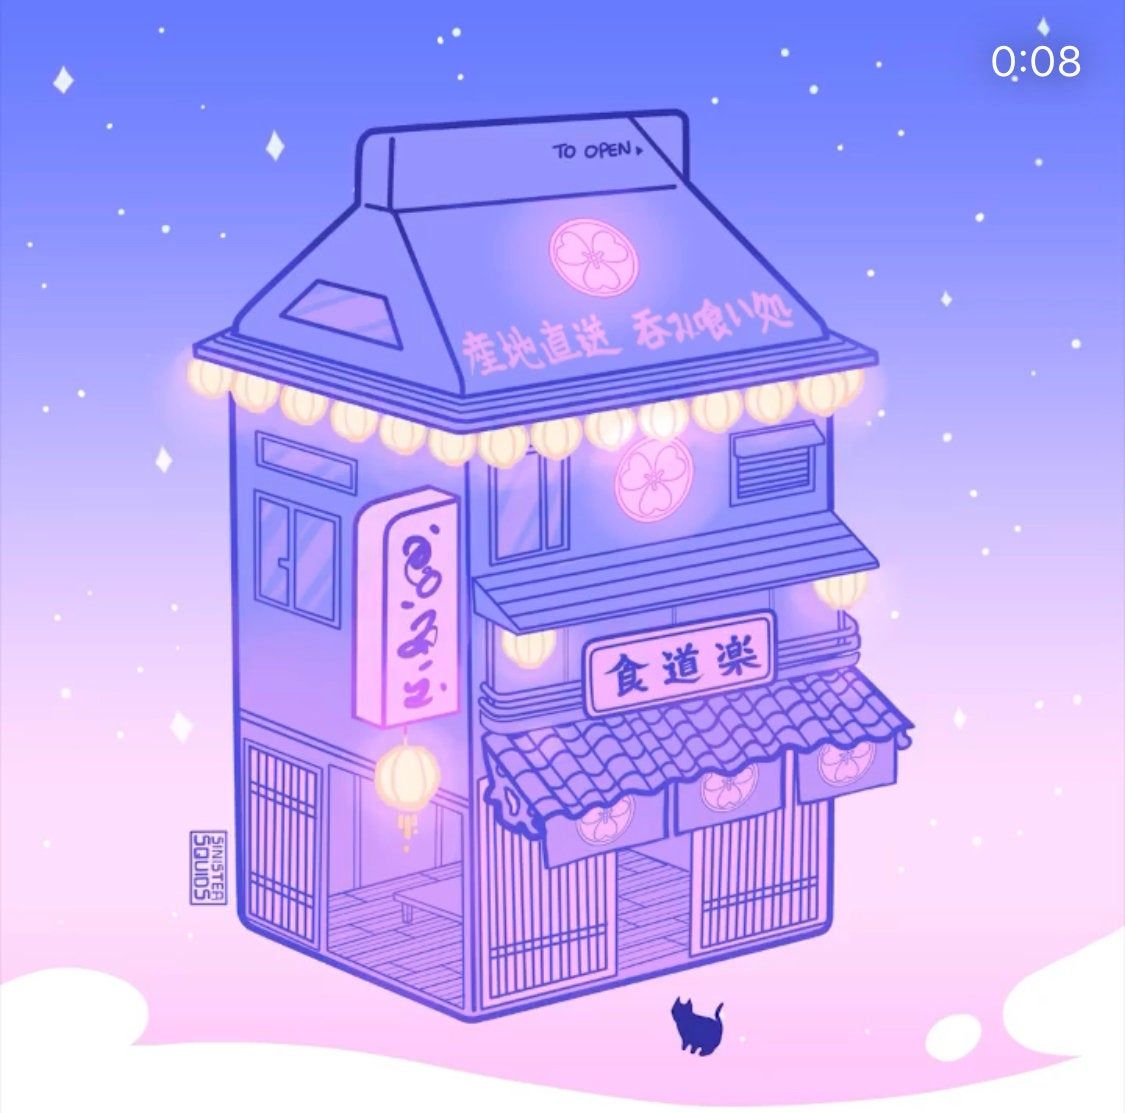 Animated Midnight Juice Box Cafe MP4 Phone Wallpaper or Background. Vaporwave aesthetic. digital download. Animal crossing music, Animation artwork, Anime store